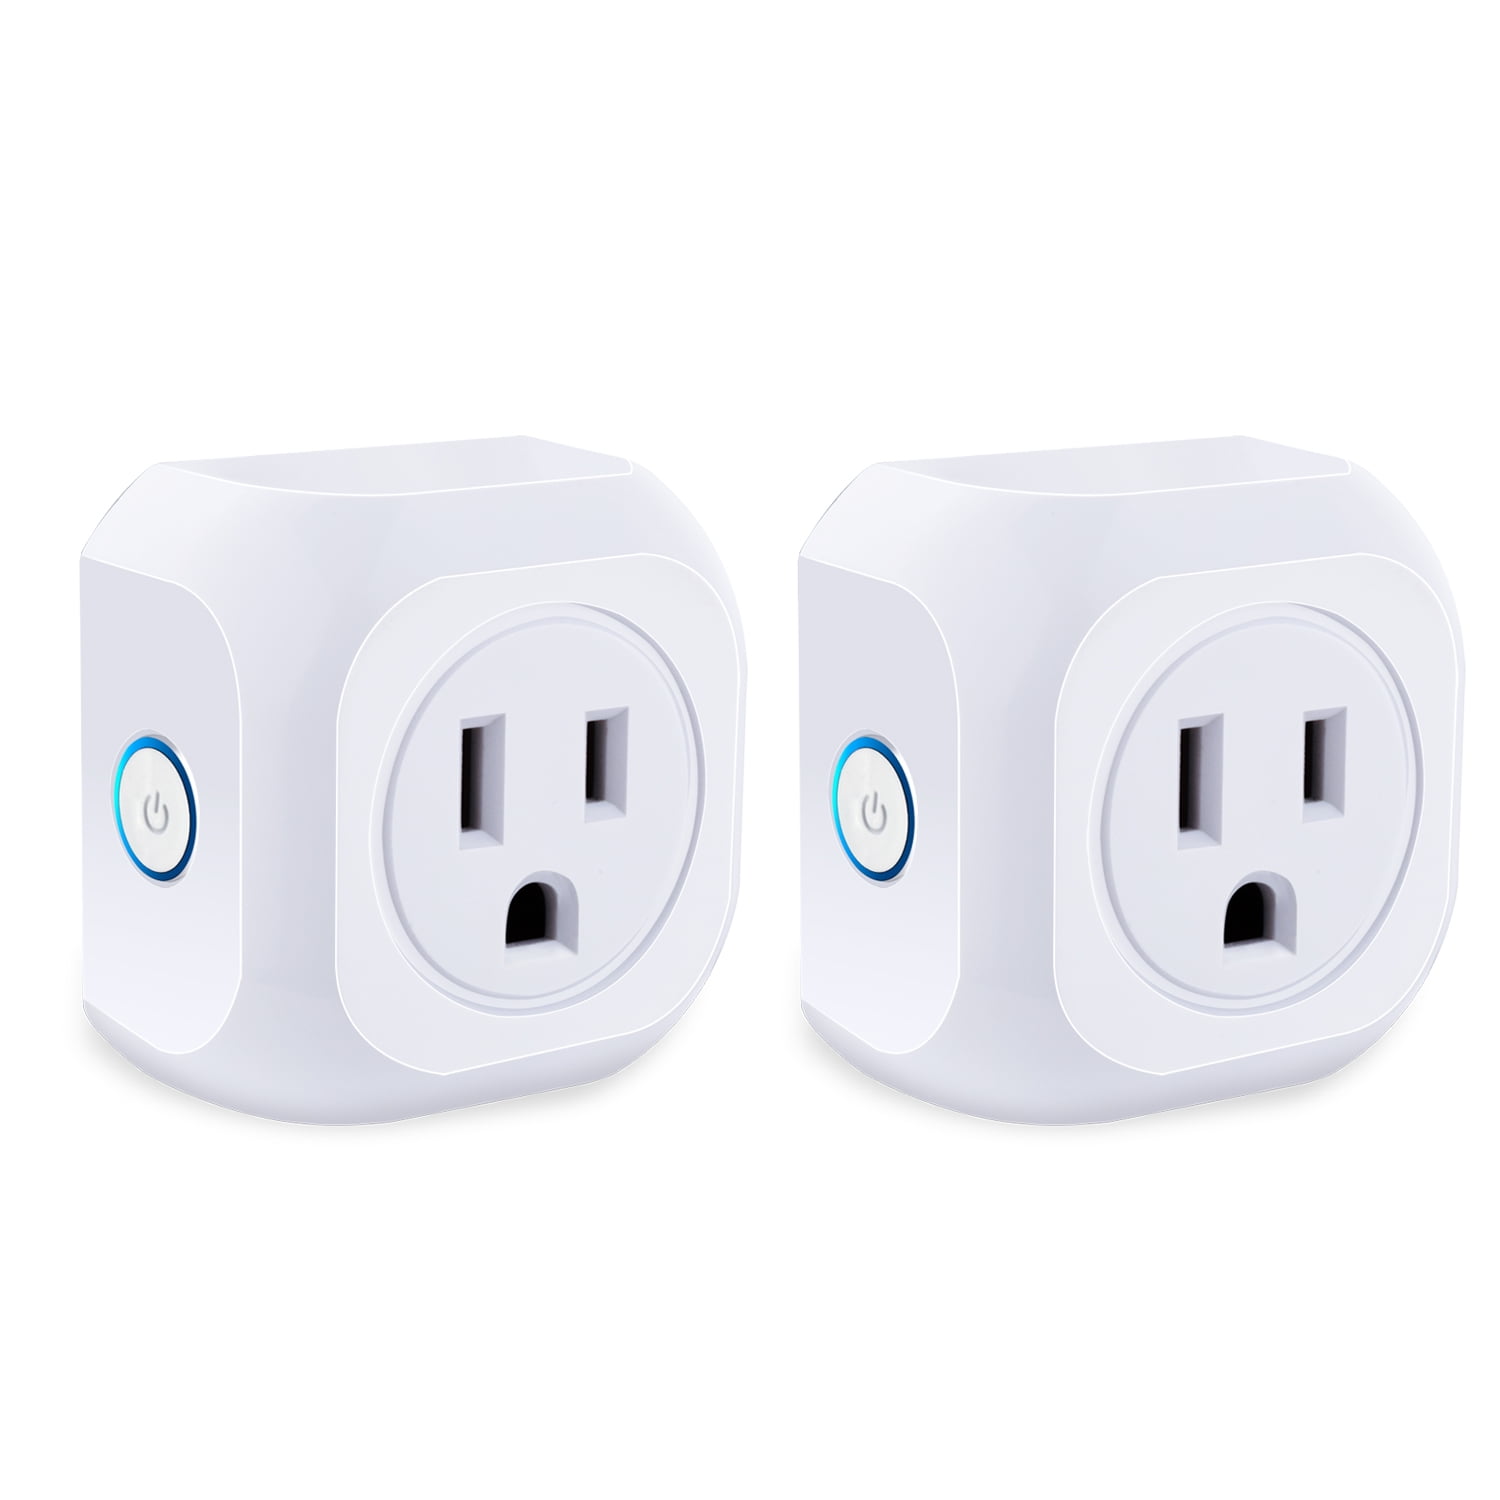 Remote Control your home appliances from Anywhere Mini Outlet,Energy Monitoring Wireless Mini Remote Compatible with Alexa Google Home & IFTTT Wifi Socket Wifi Smart Plug No Hub Required 